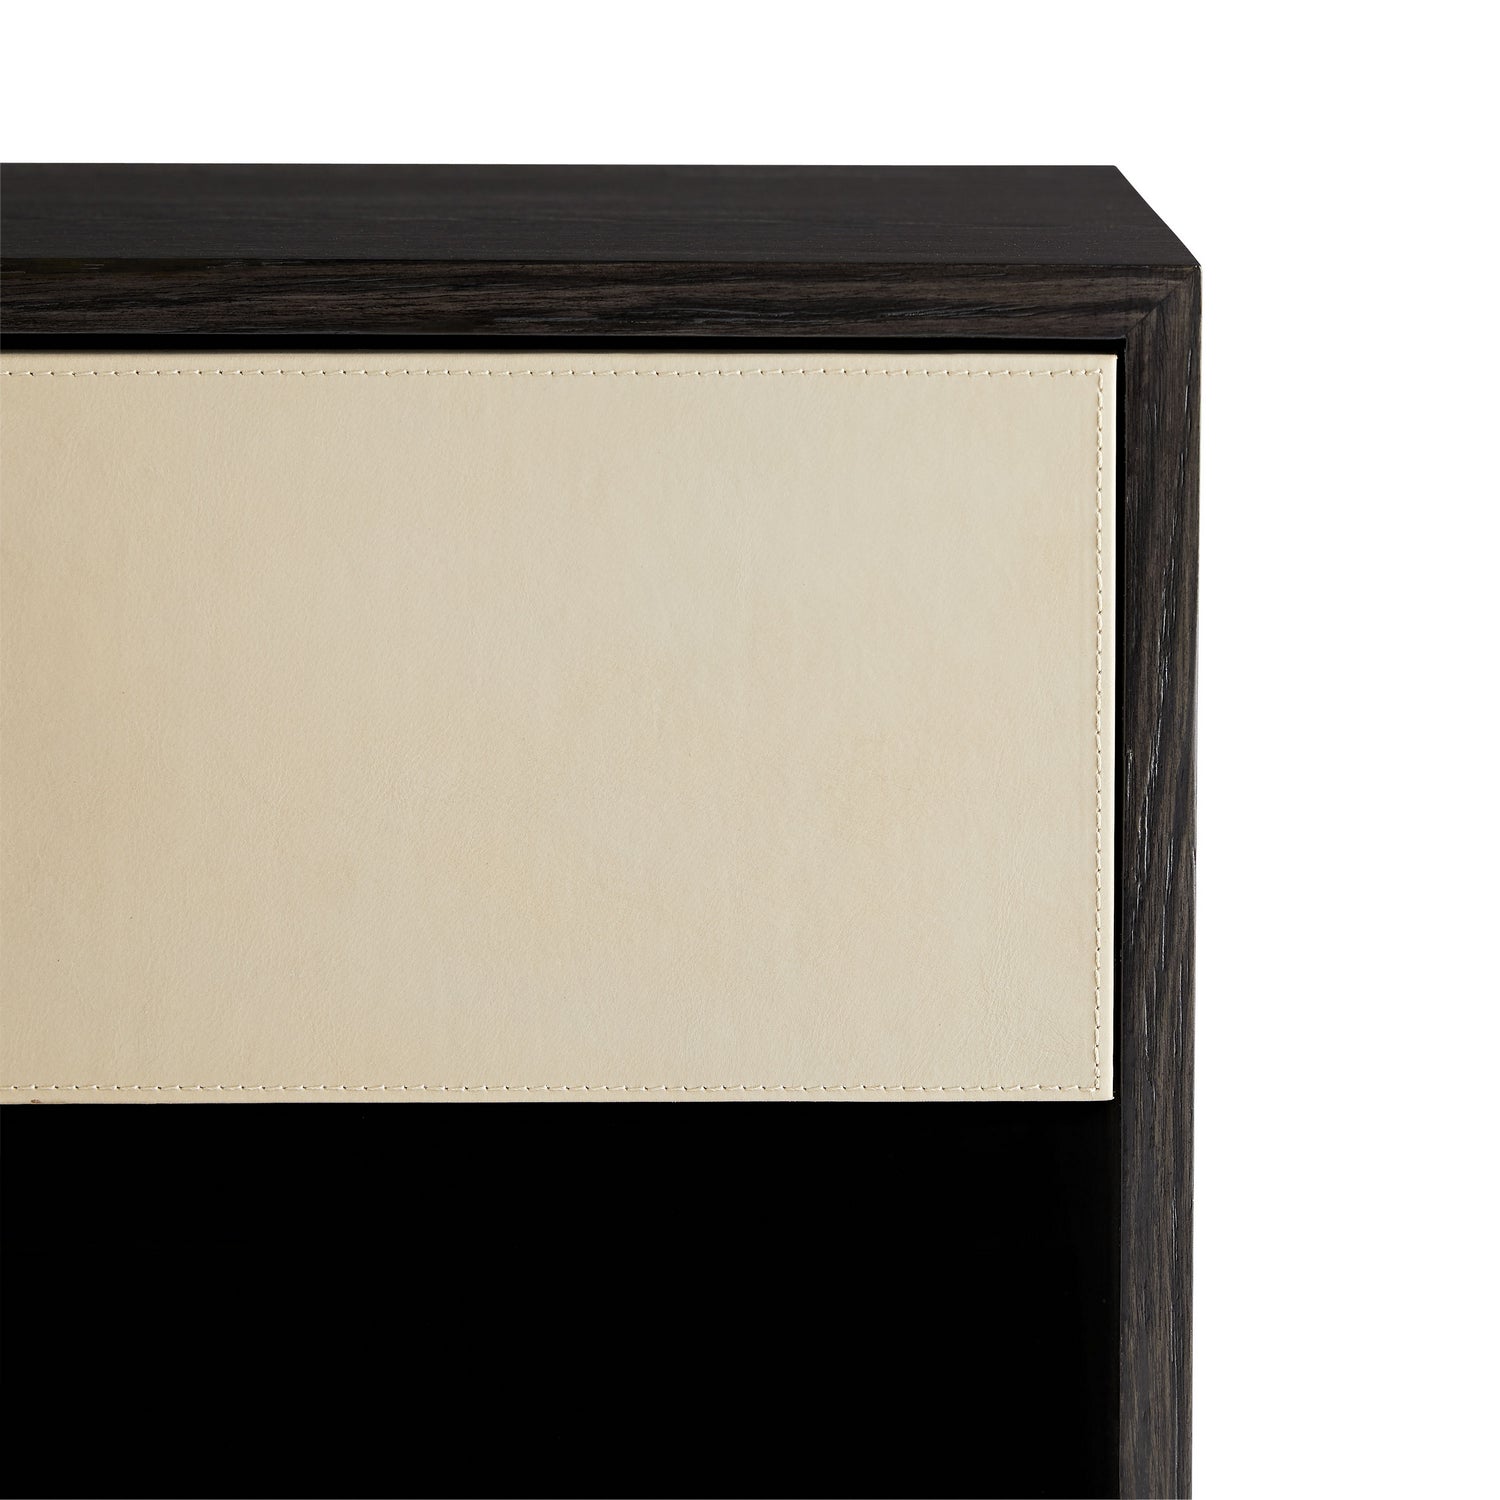 End Table from the Fitz collection in Sable finish